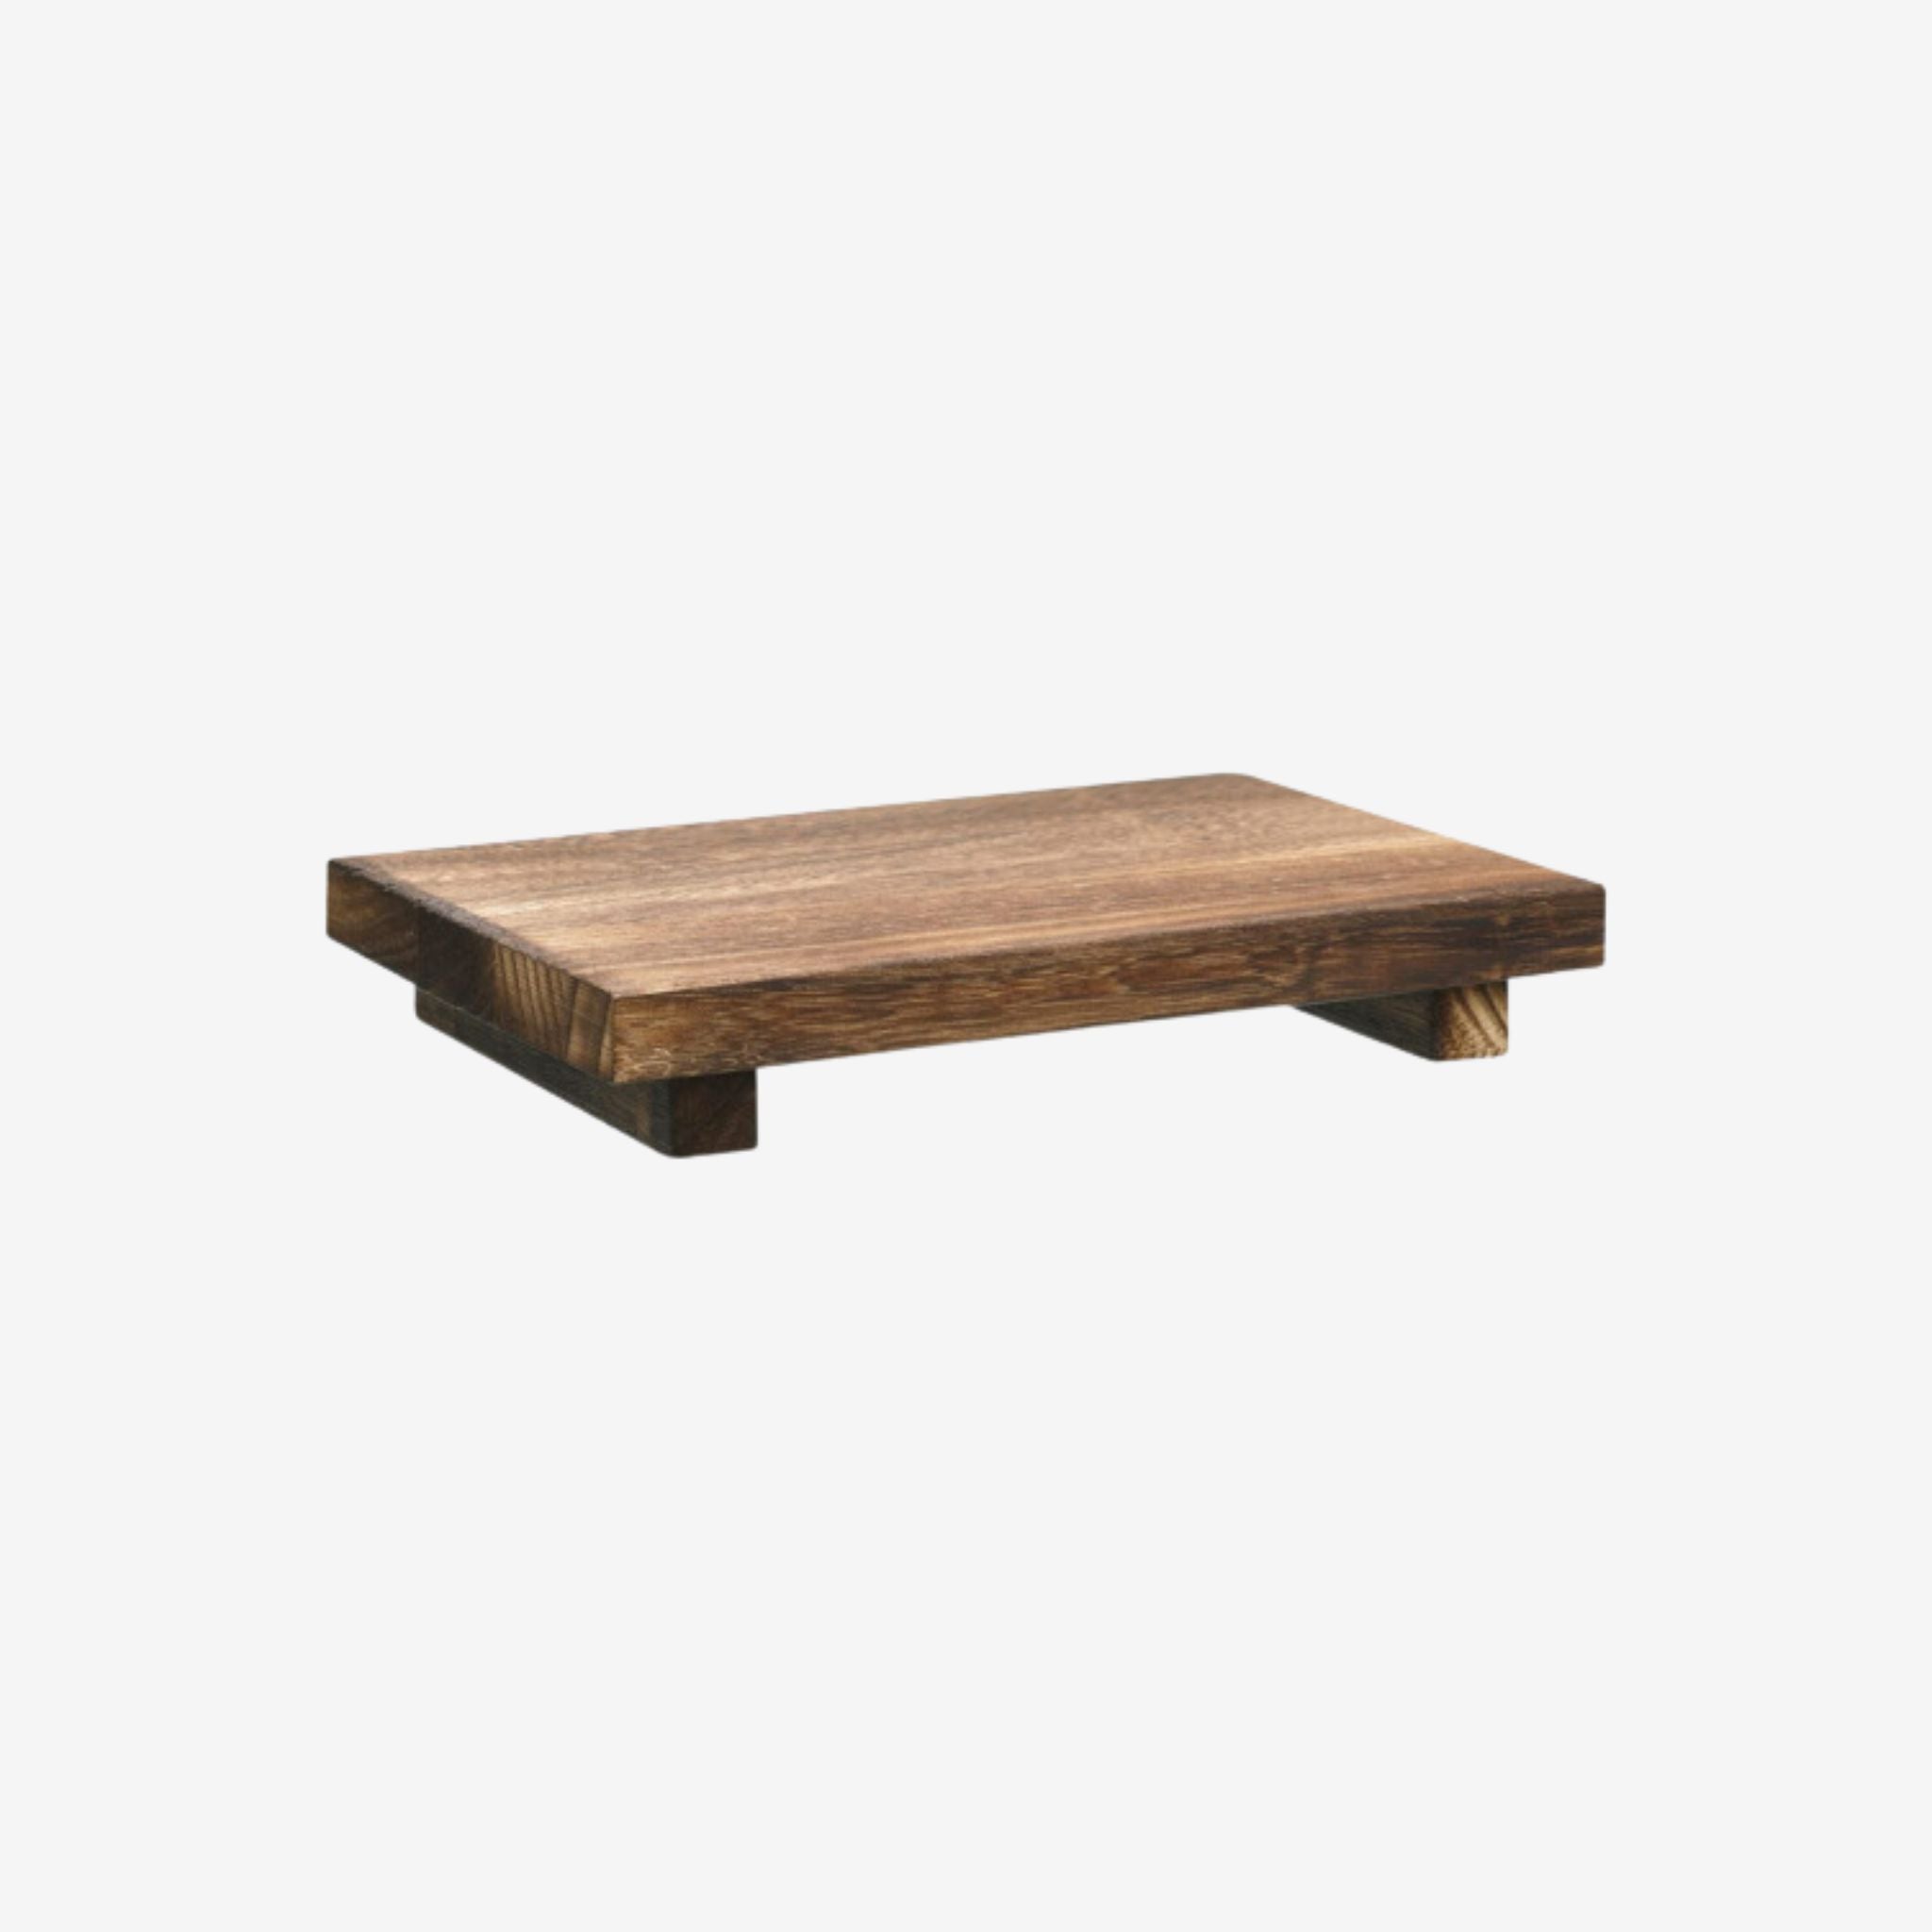 DECORATIVE WOODEN TRAY - LARGE - Simply Elevated Home Furnishings 